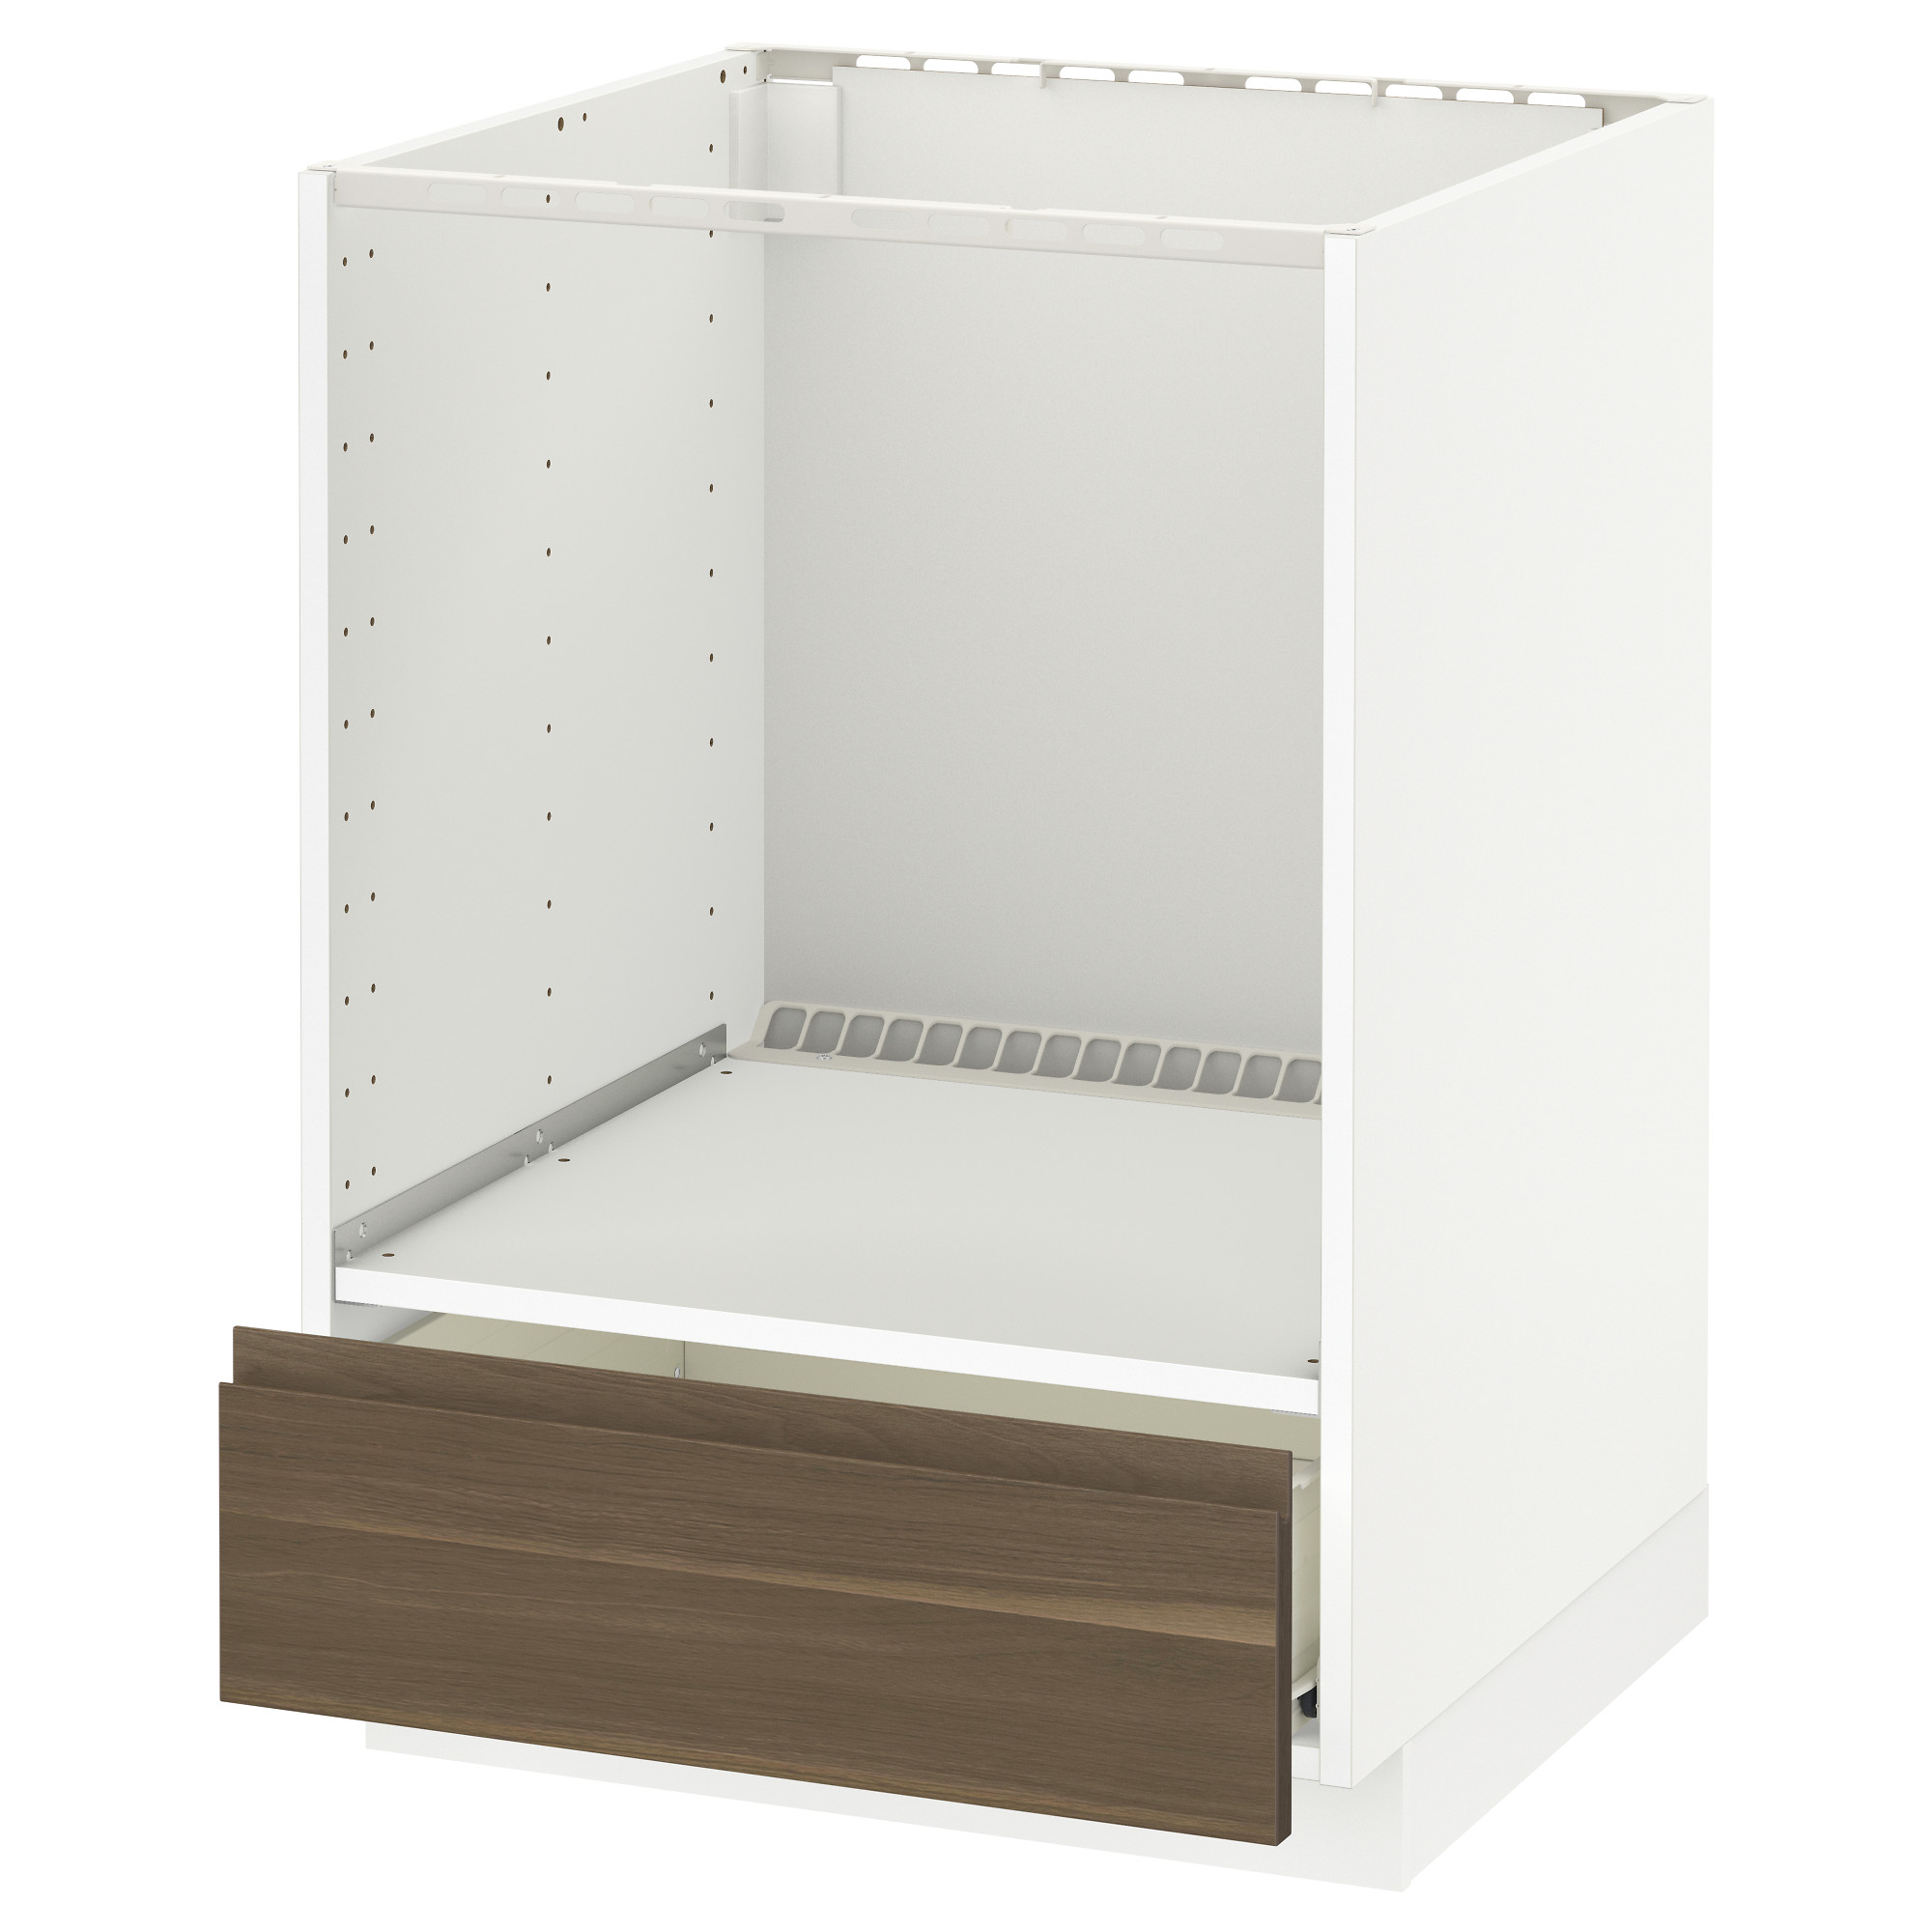 METOD base cabinet for oven with drawer